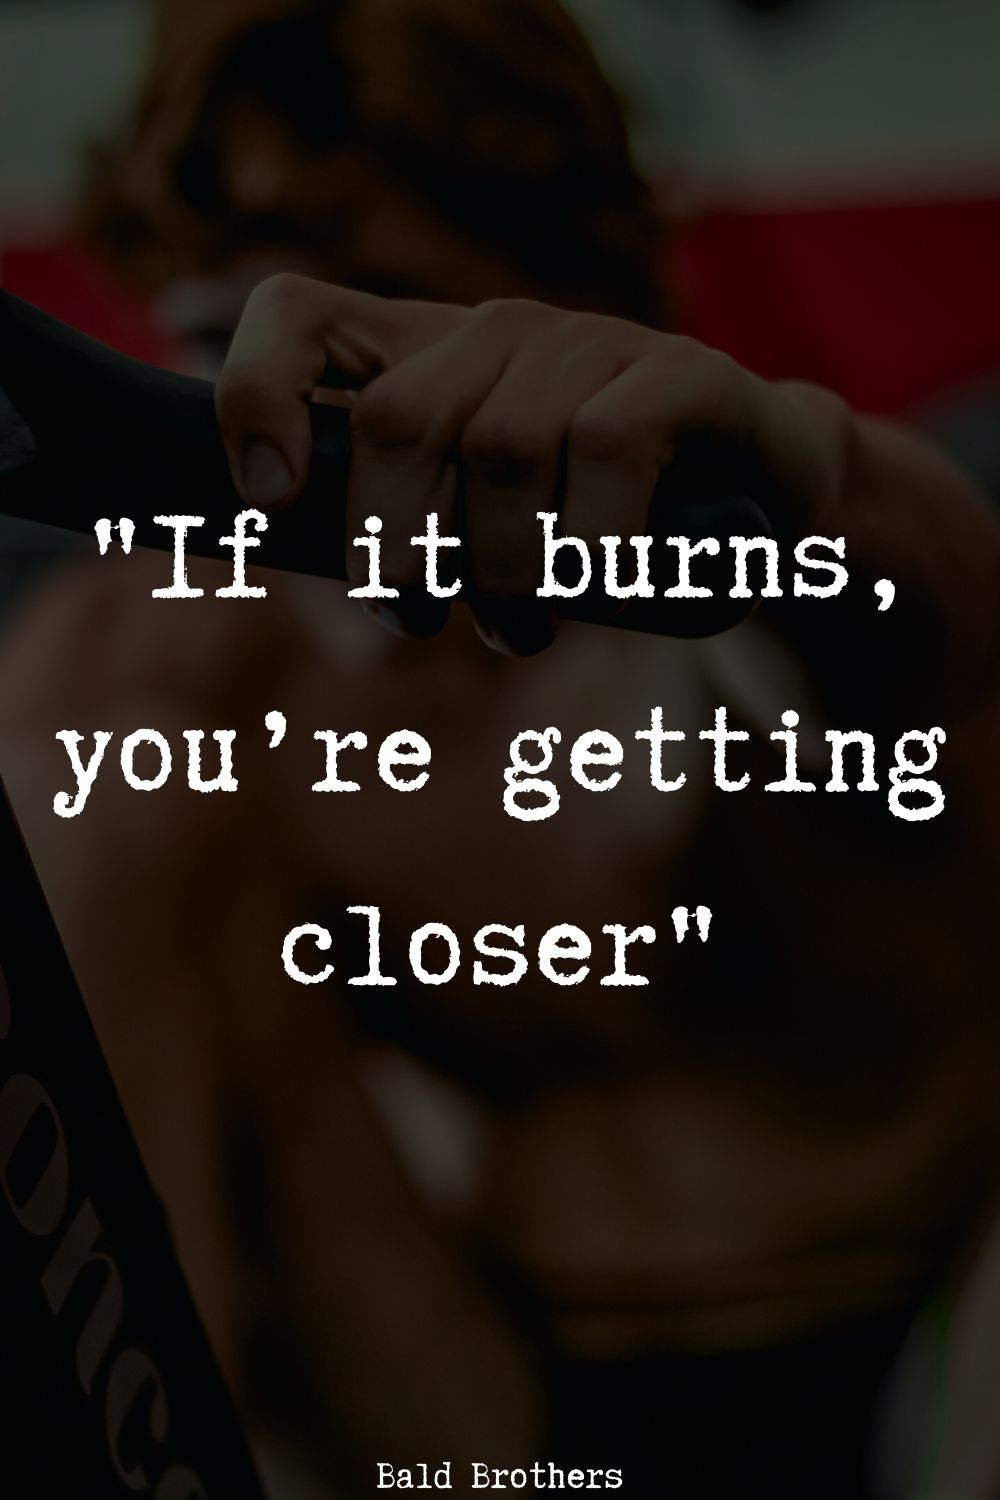 30 Best Workout Quotes That'll Keep You Motivated In The Gym